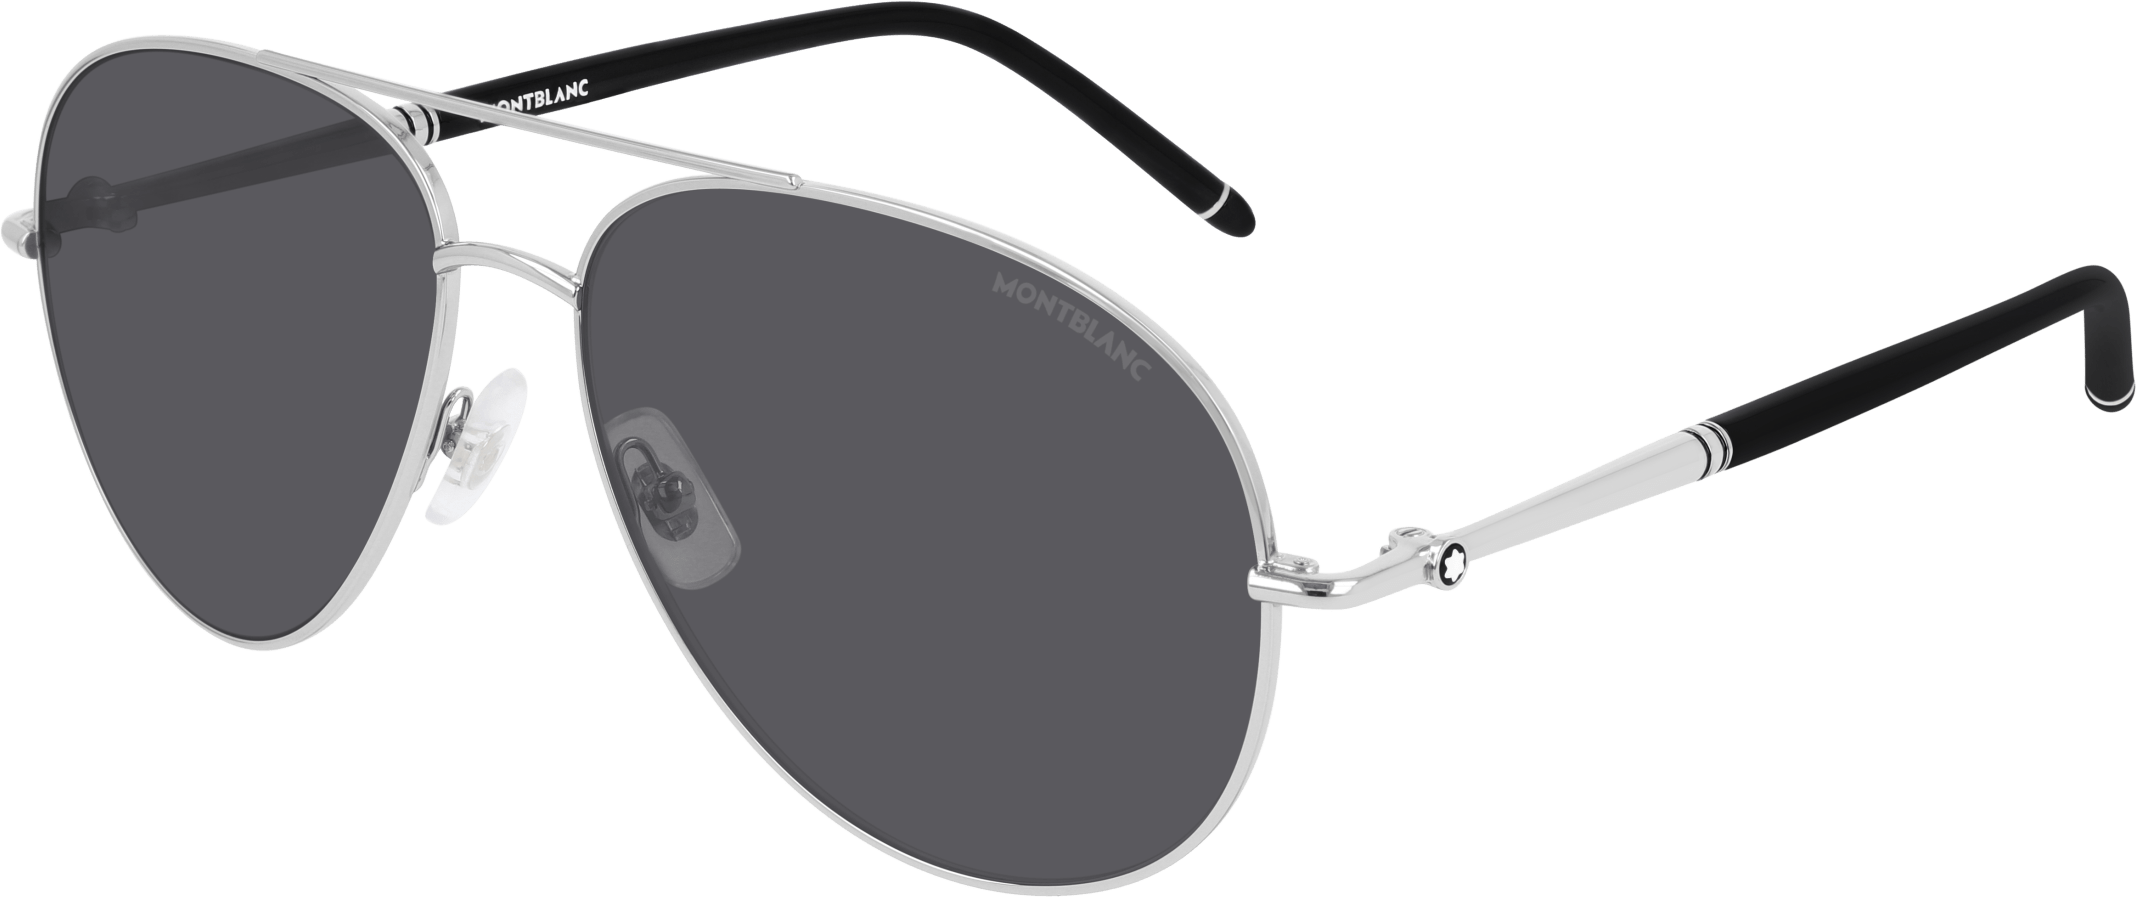 Color_MB0068S-004 - NONE - POLARIZED